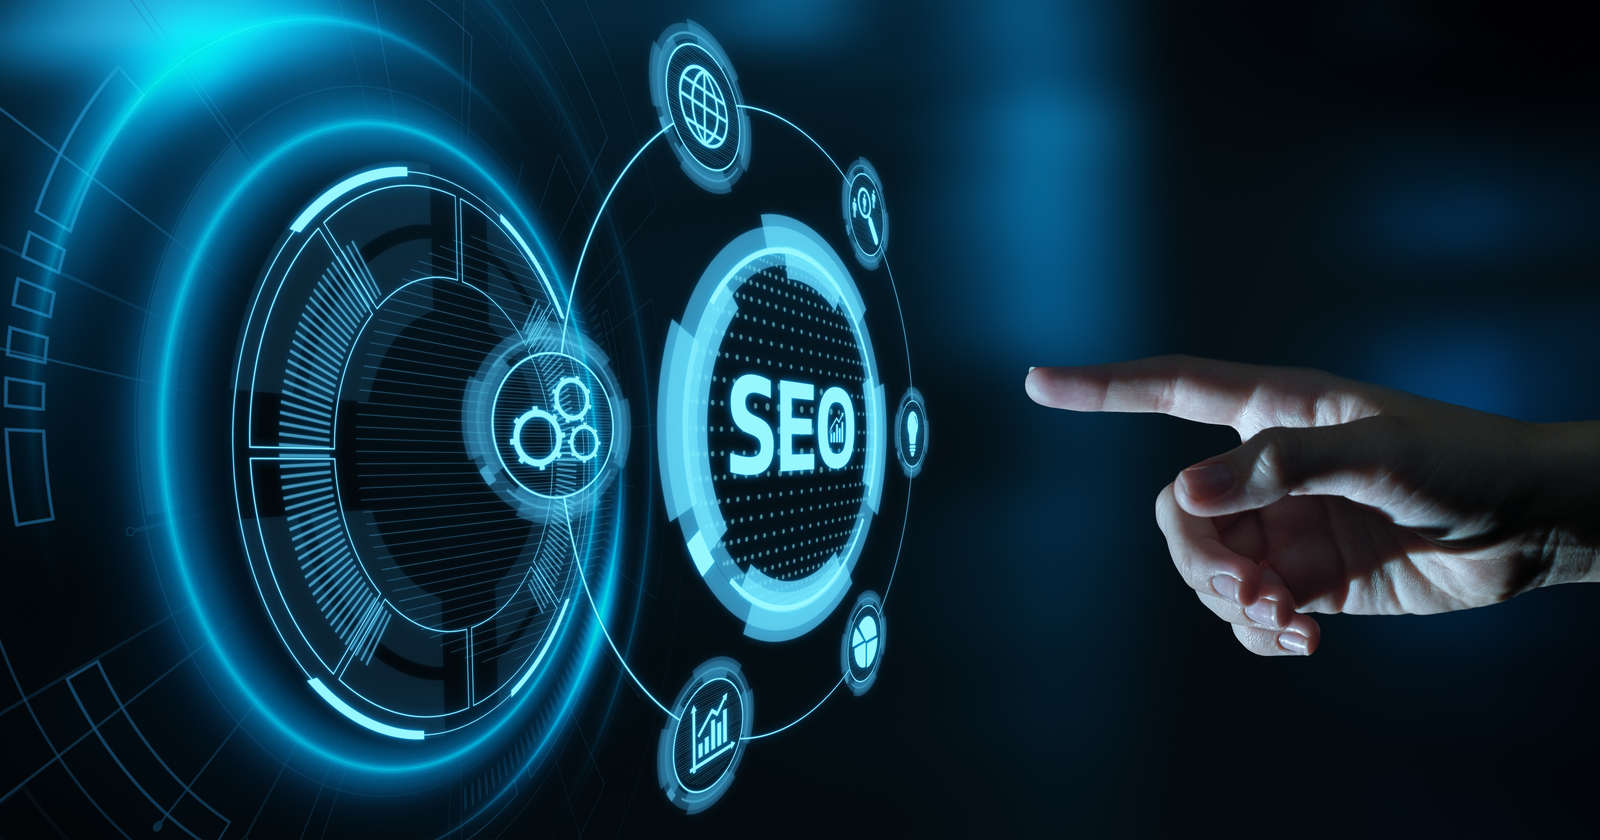 What Is Negative Seo?